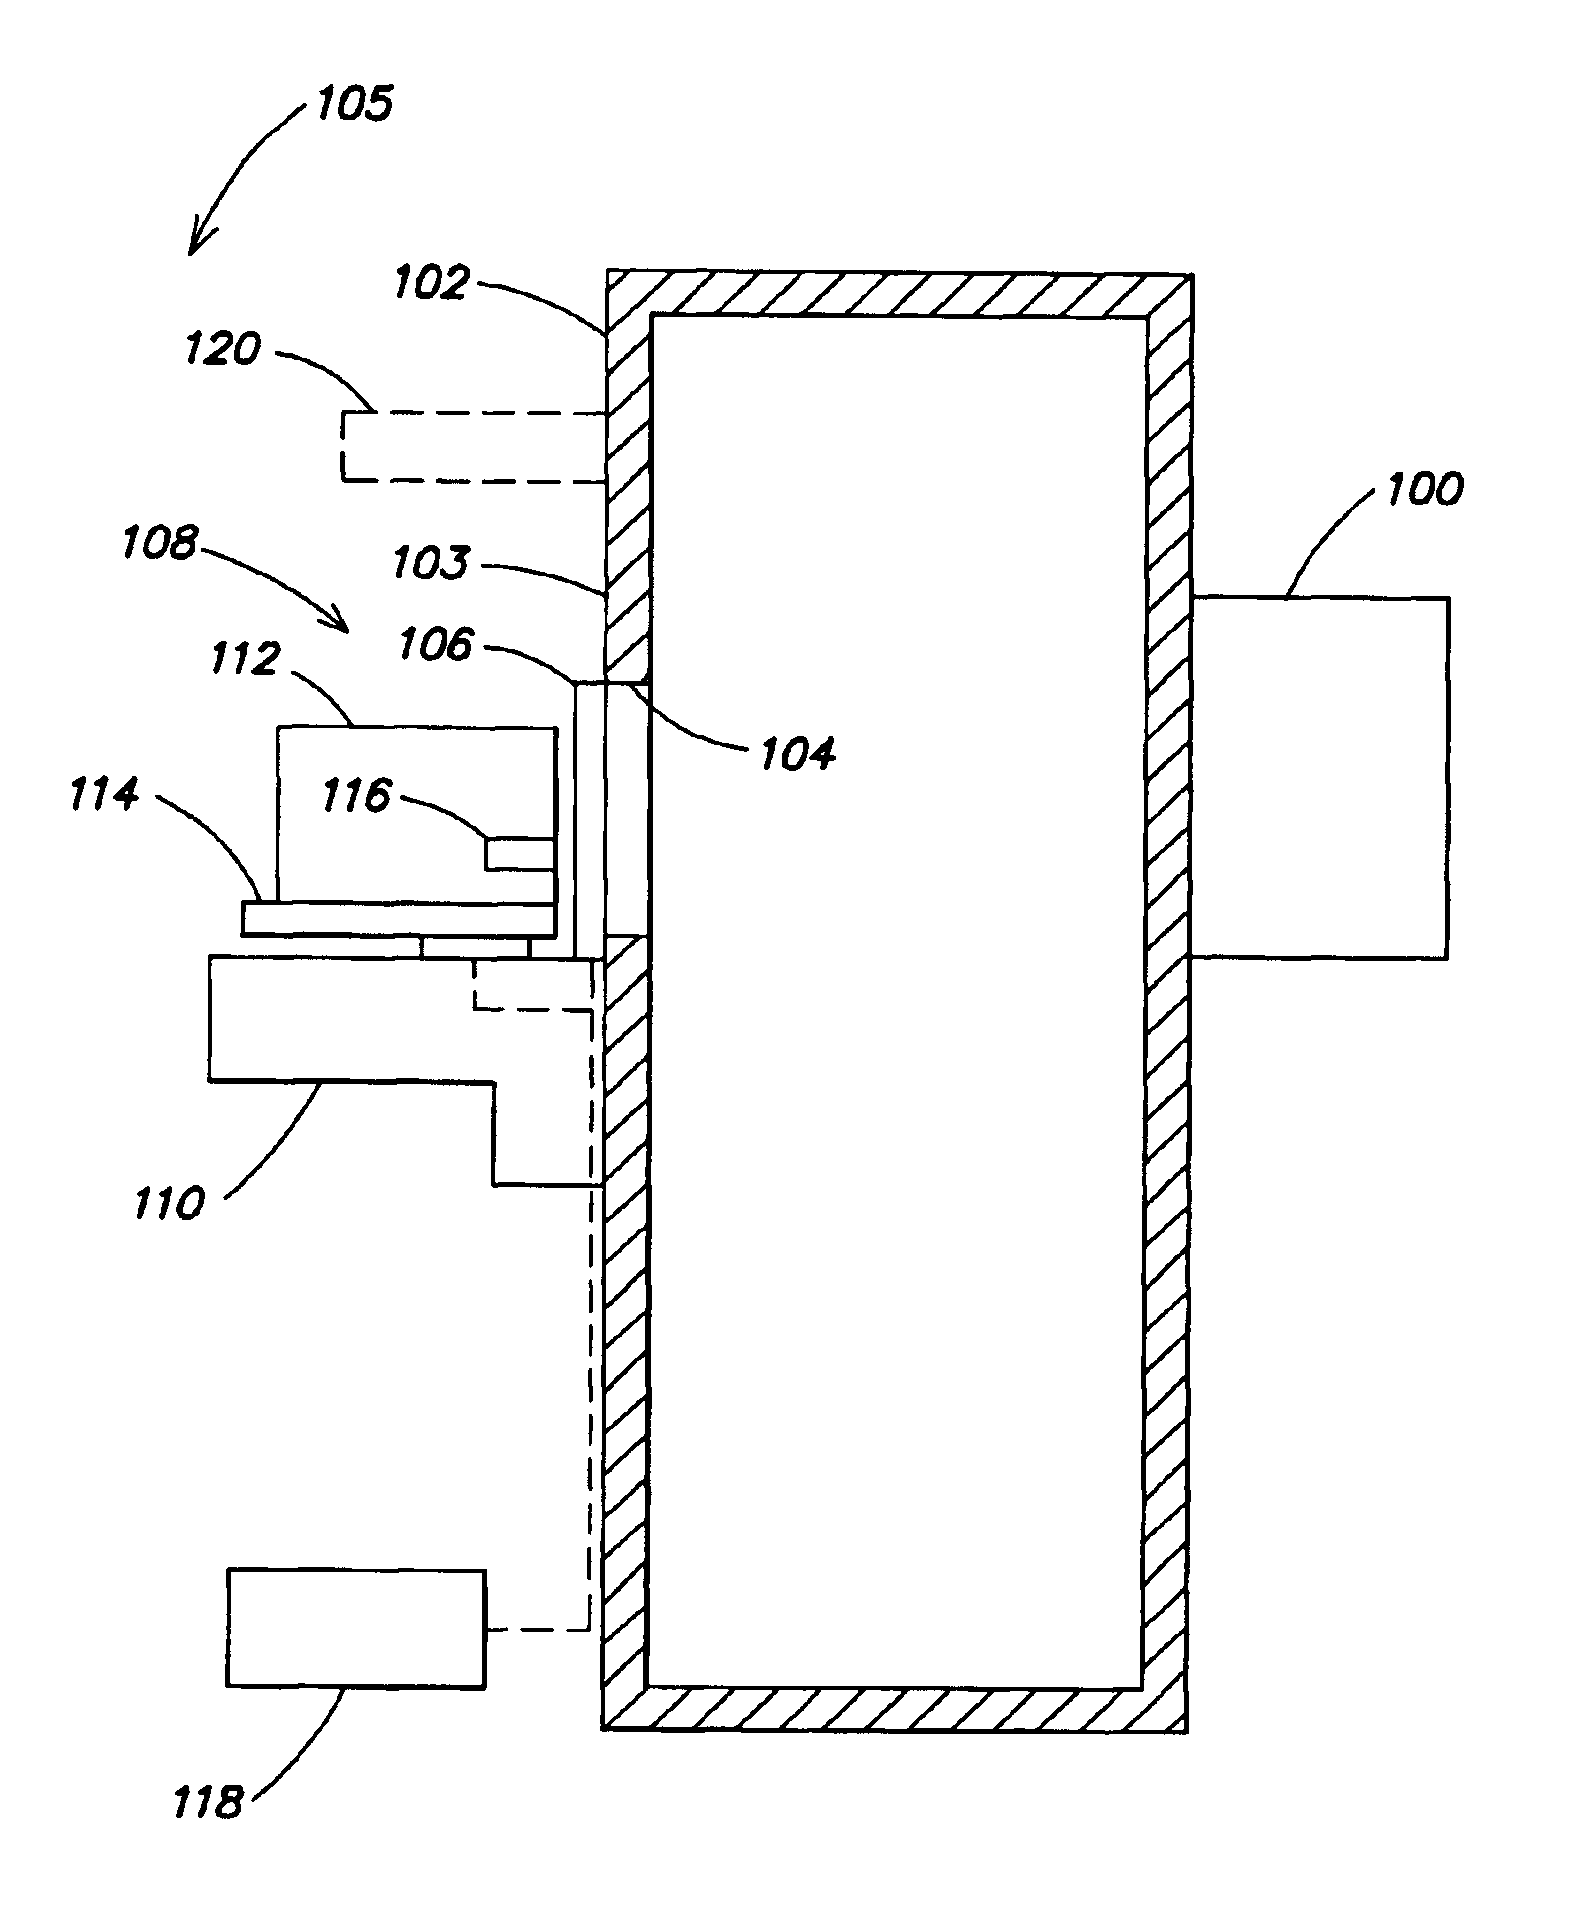 Substrate carrier having door latching and substrate clamping mechanisms